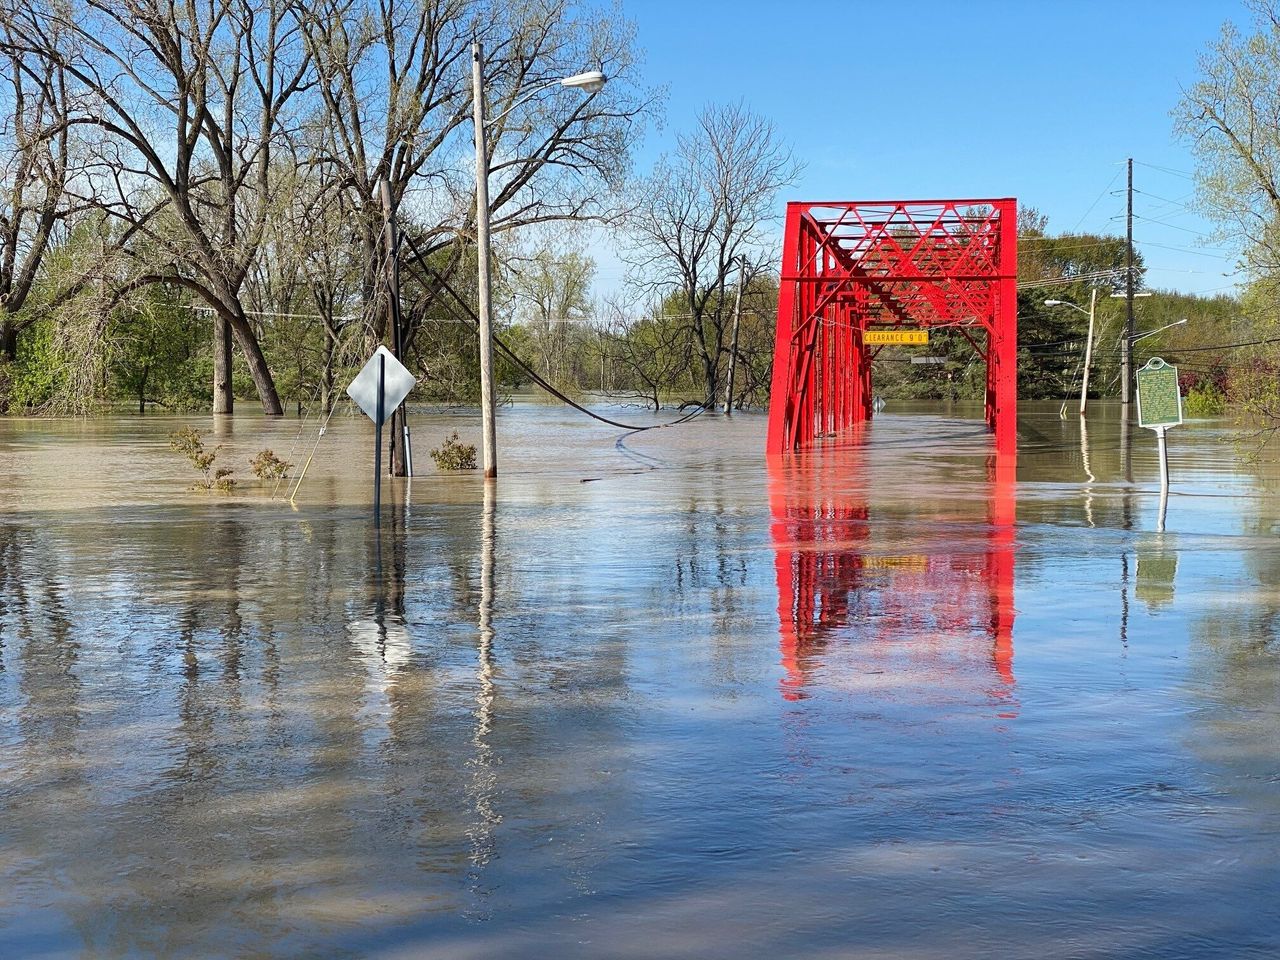 Floodwaters overwhelm a bridge two blocks from the home of Armin Mersmann, a Midland-based artist.